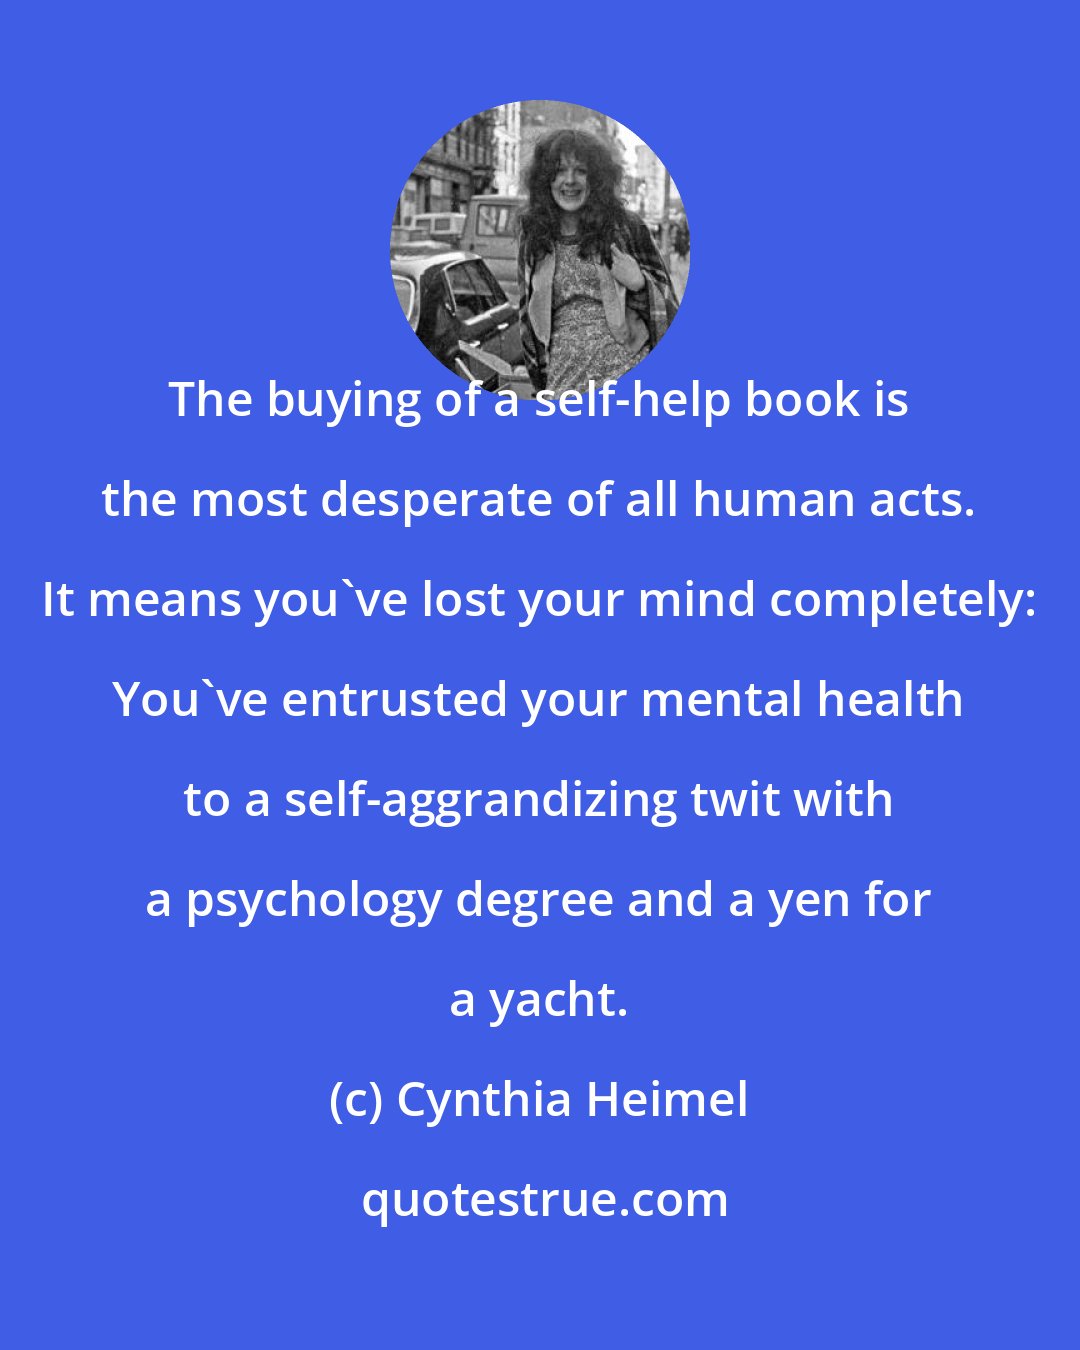 Cynthia Heimel: The buying of a self-help book is the most desperate of all human acts. It means you've lost your mind completely: You've entrusted your mental health to a self-aggrandizing twit with a psychology degree and a yen for a yacht.